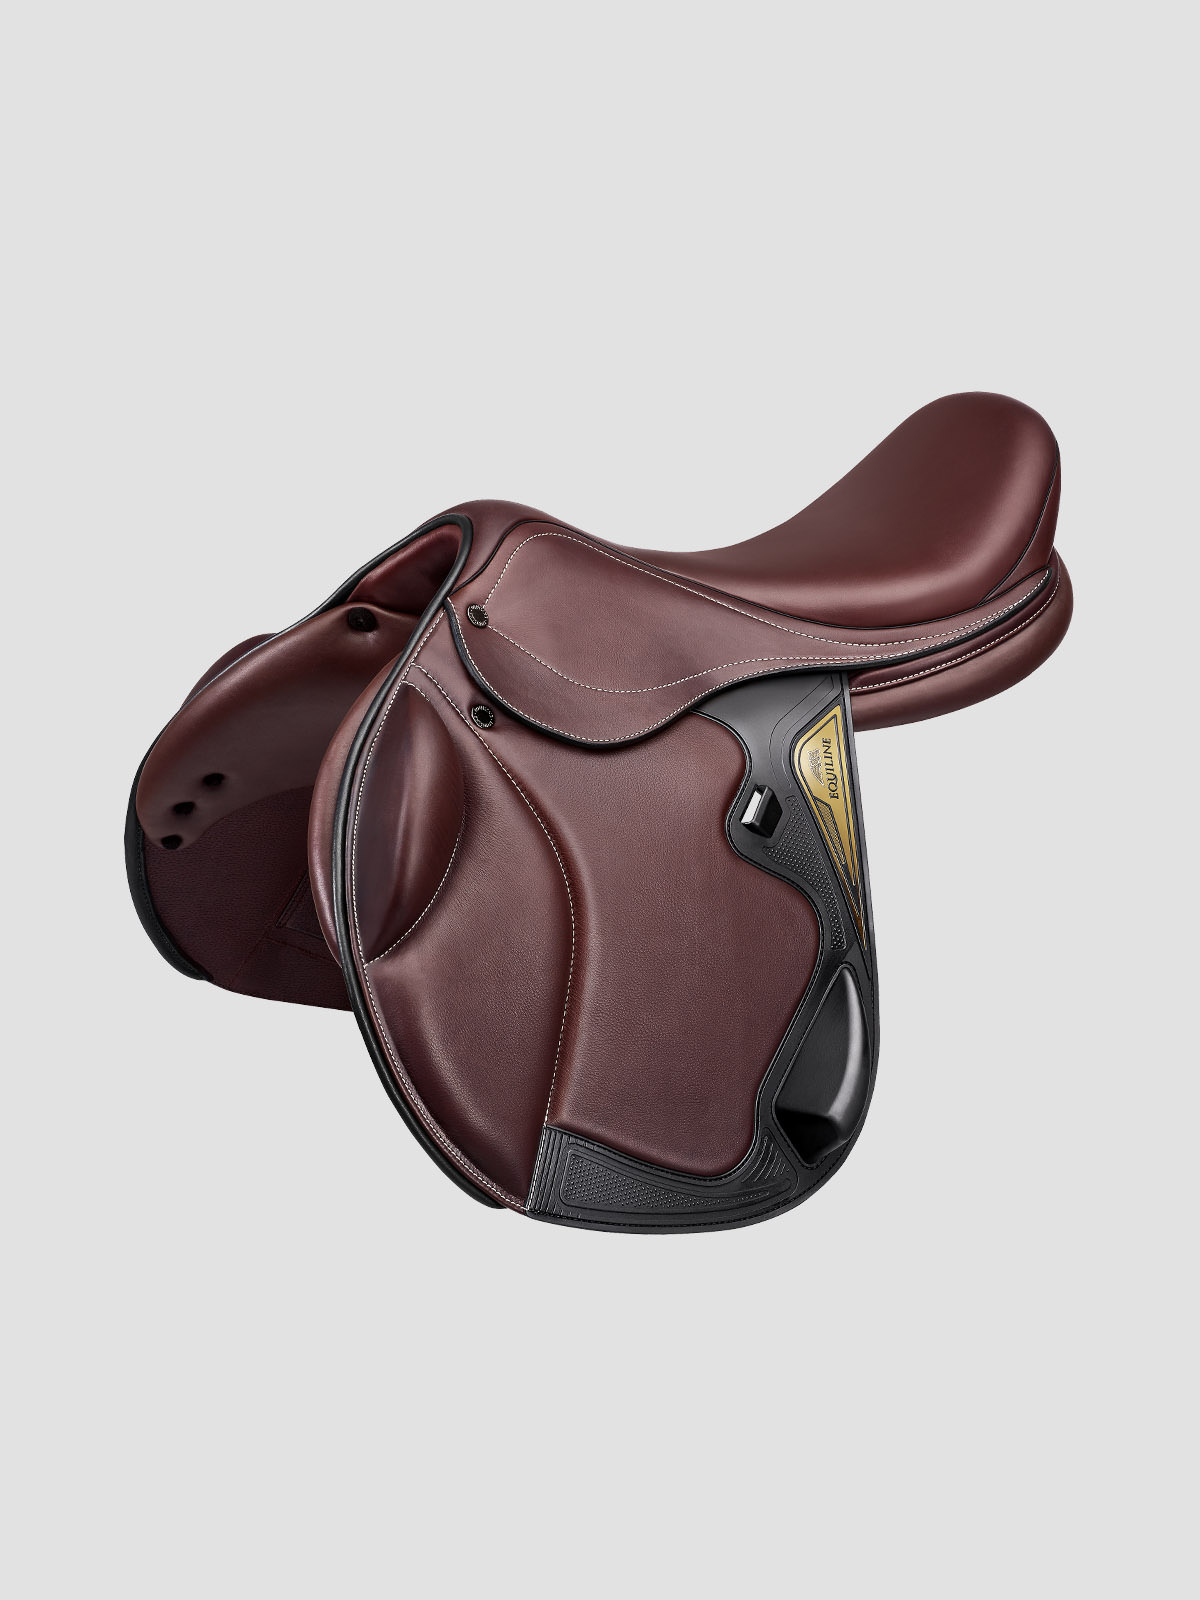 EQUILINE CROSS JUMPING SADDLE 1